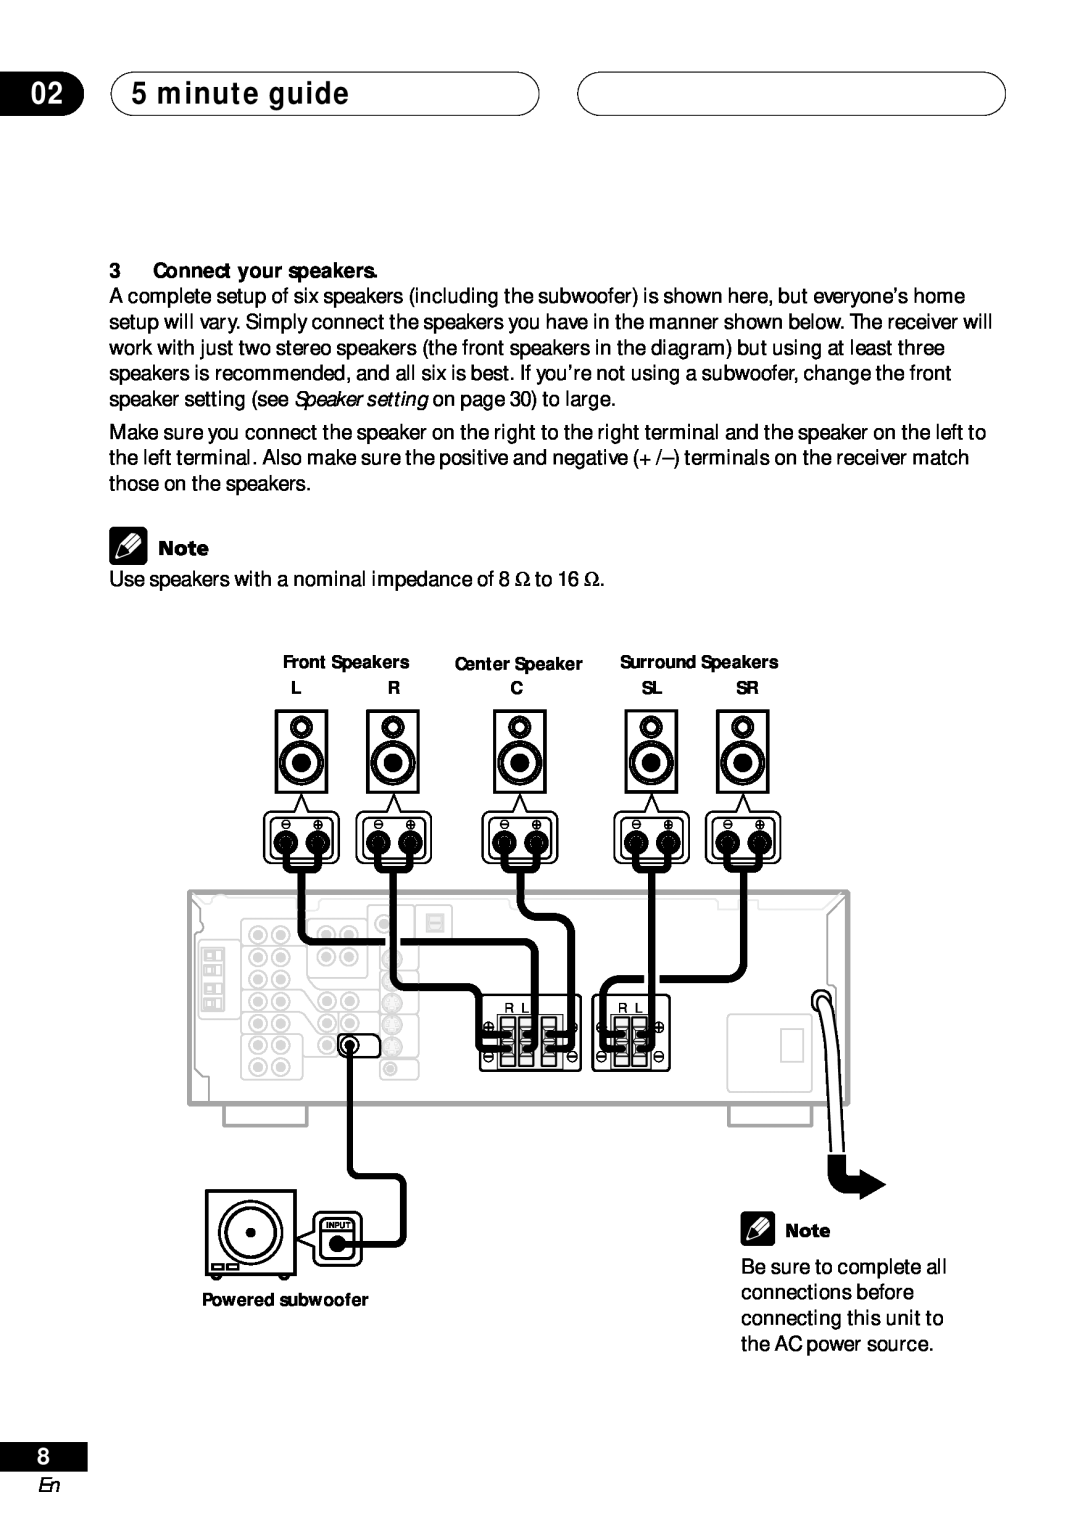 Pioneer VSX-D41, VSX-D511 manual 02 5 minute guide, Connect your speakers 